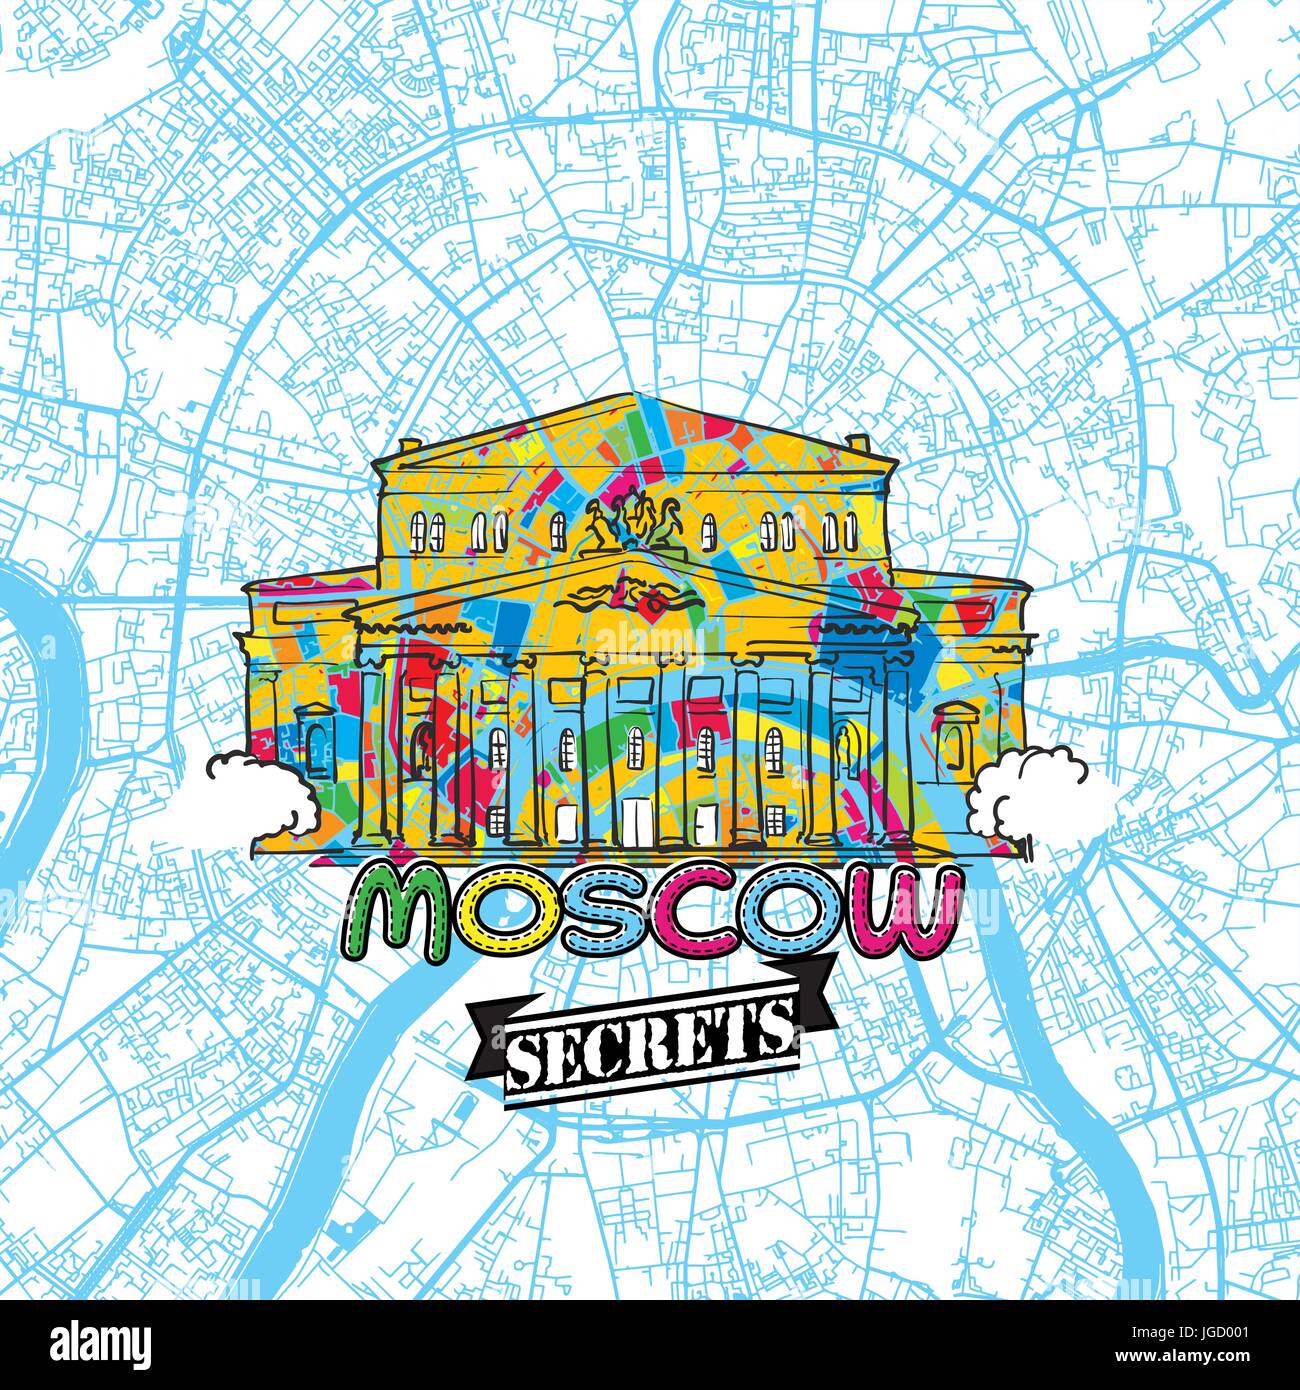 Moscow Travel Secrets Art Map for mapping experts and travel guides. Handmade city logo, typo badge and hand drawn vector image on top are grouped and Stock Vector